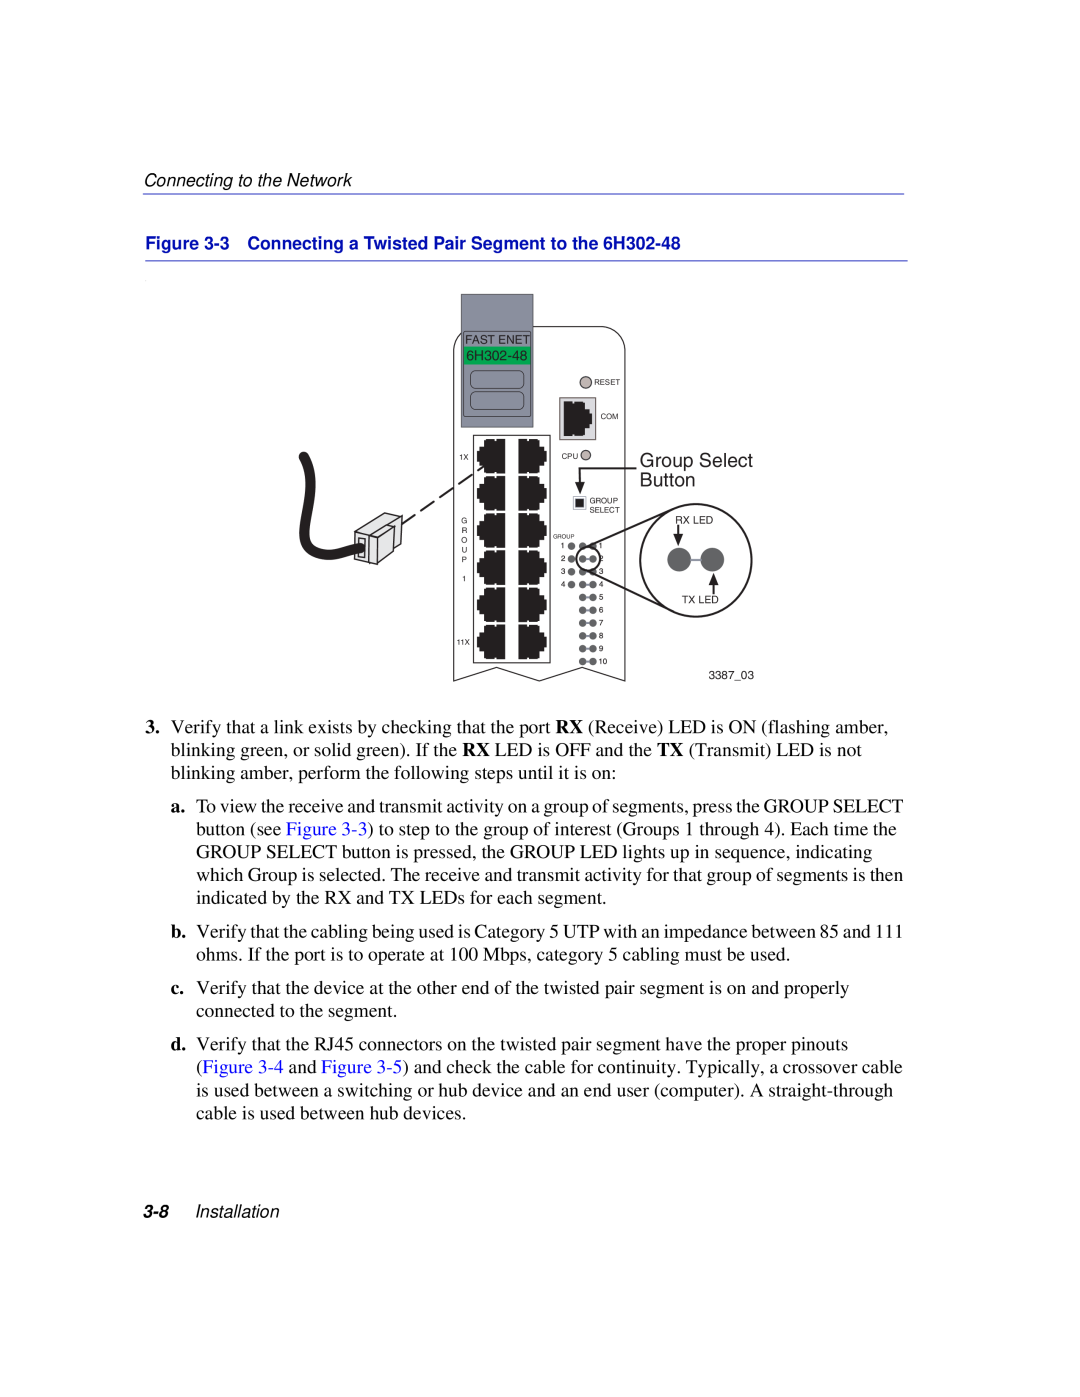 Enterasys Networks manual Group Select, Button, 3 Connecting a Twisted Pair Segment to the 6H302-48 